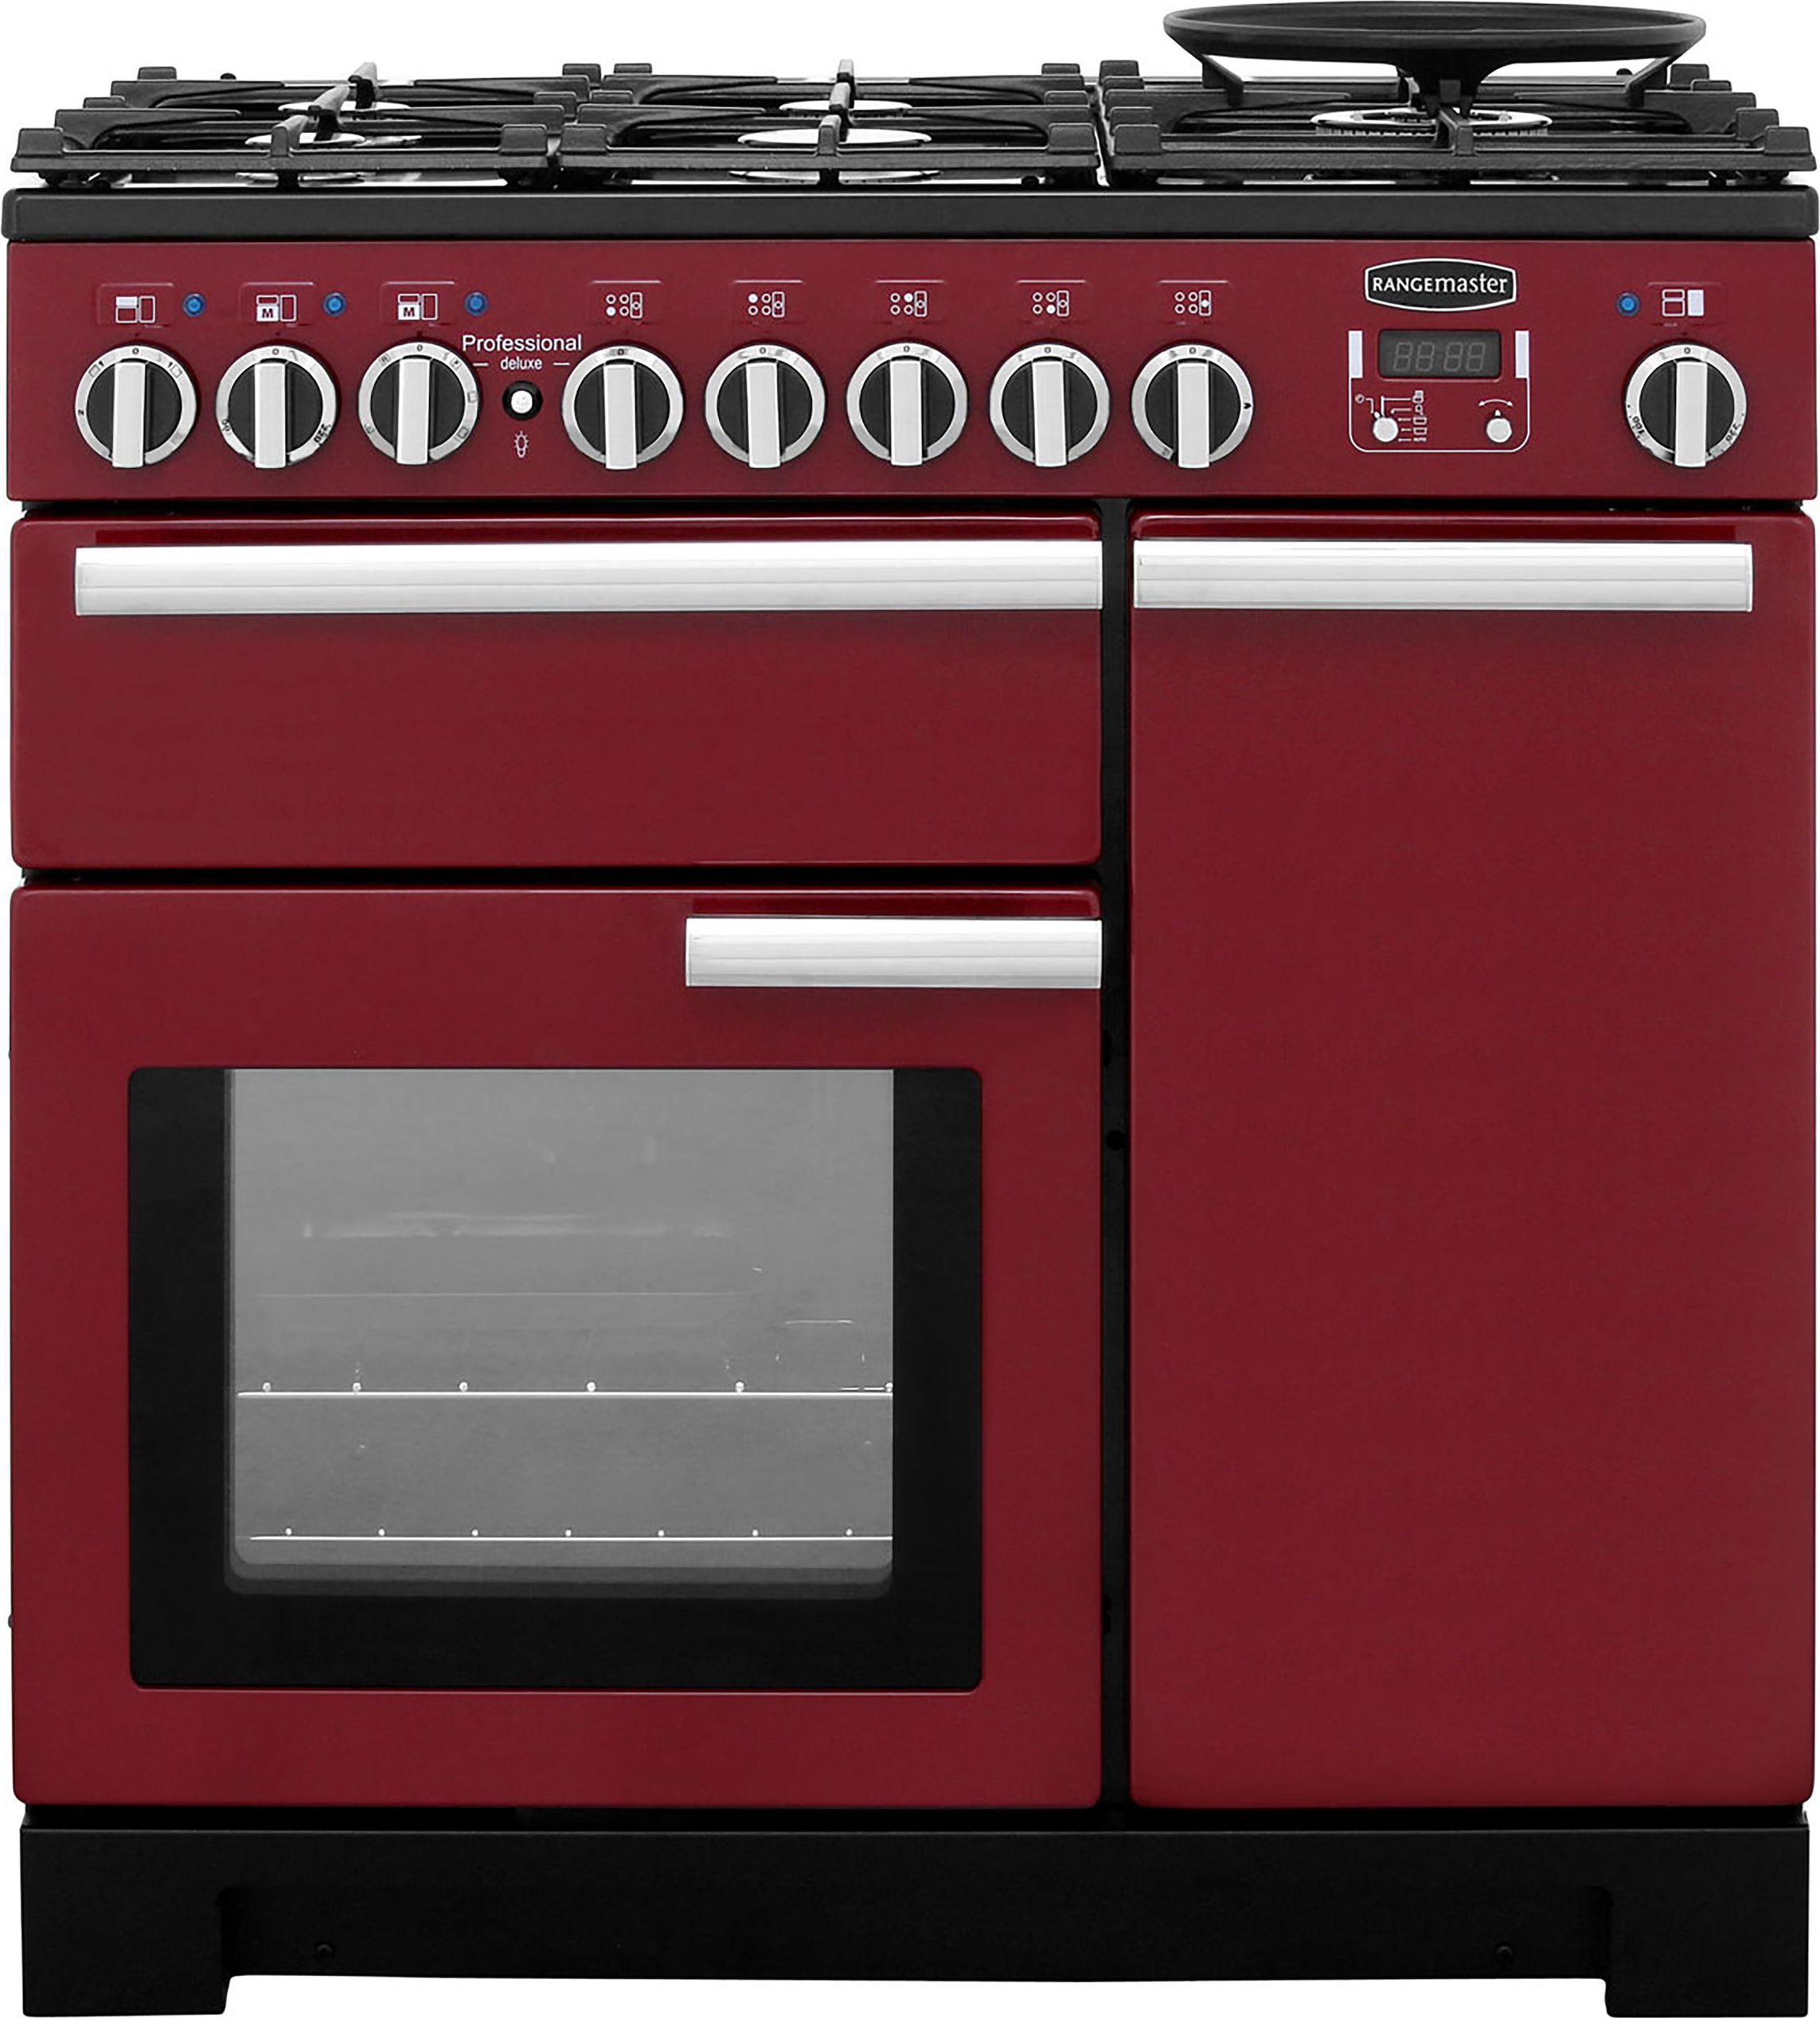 Rangemaster Professional Deluxe PDL90DFFCY/C 90cm Dual Fuel Range Cooker - Cranberry - A/A Rated, Red